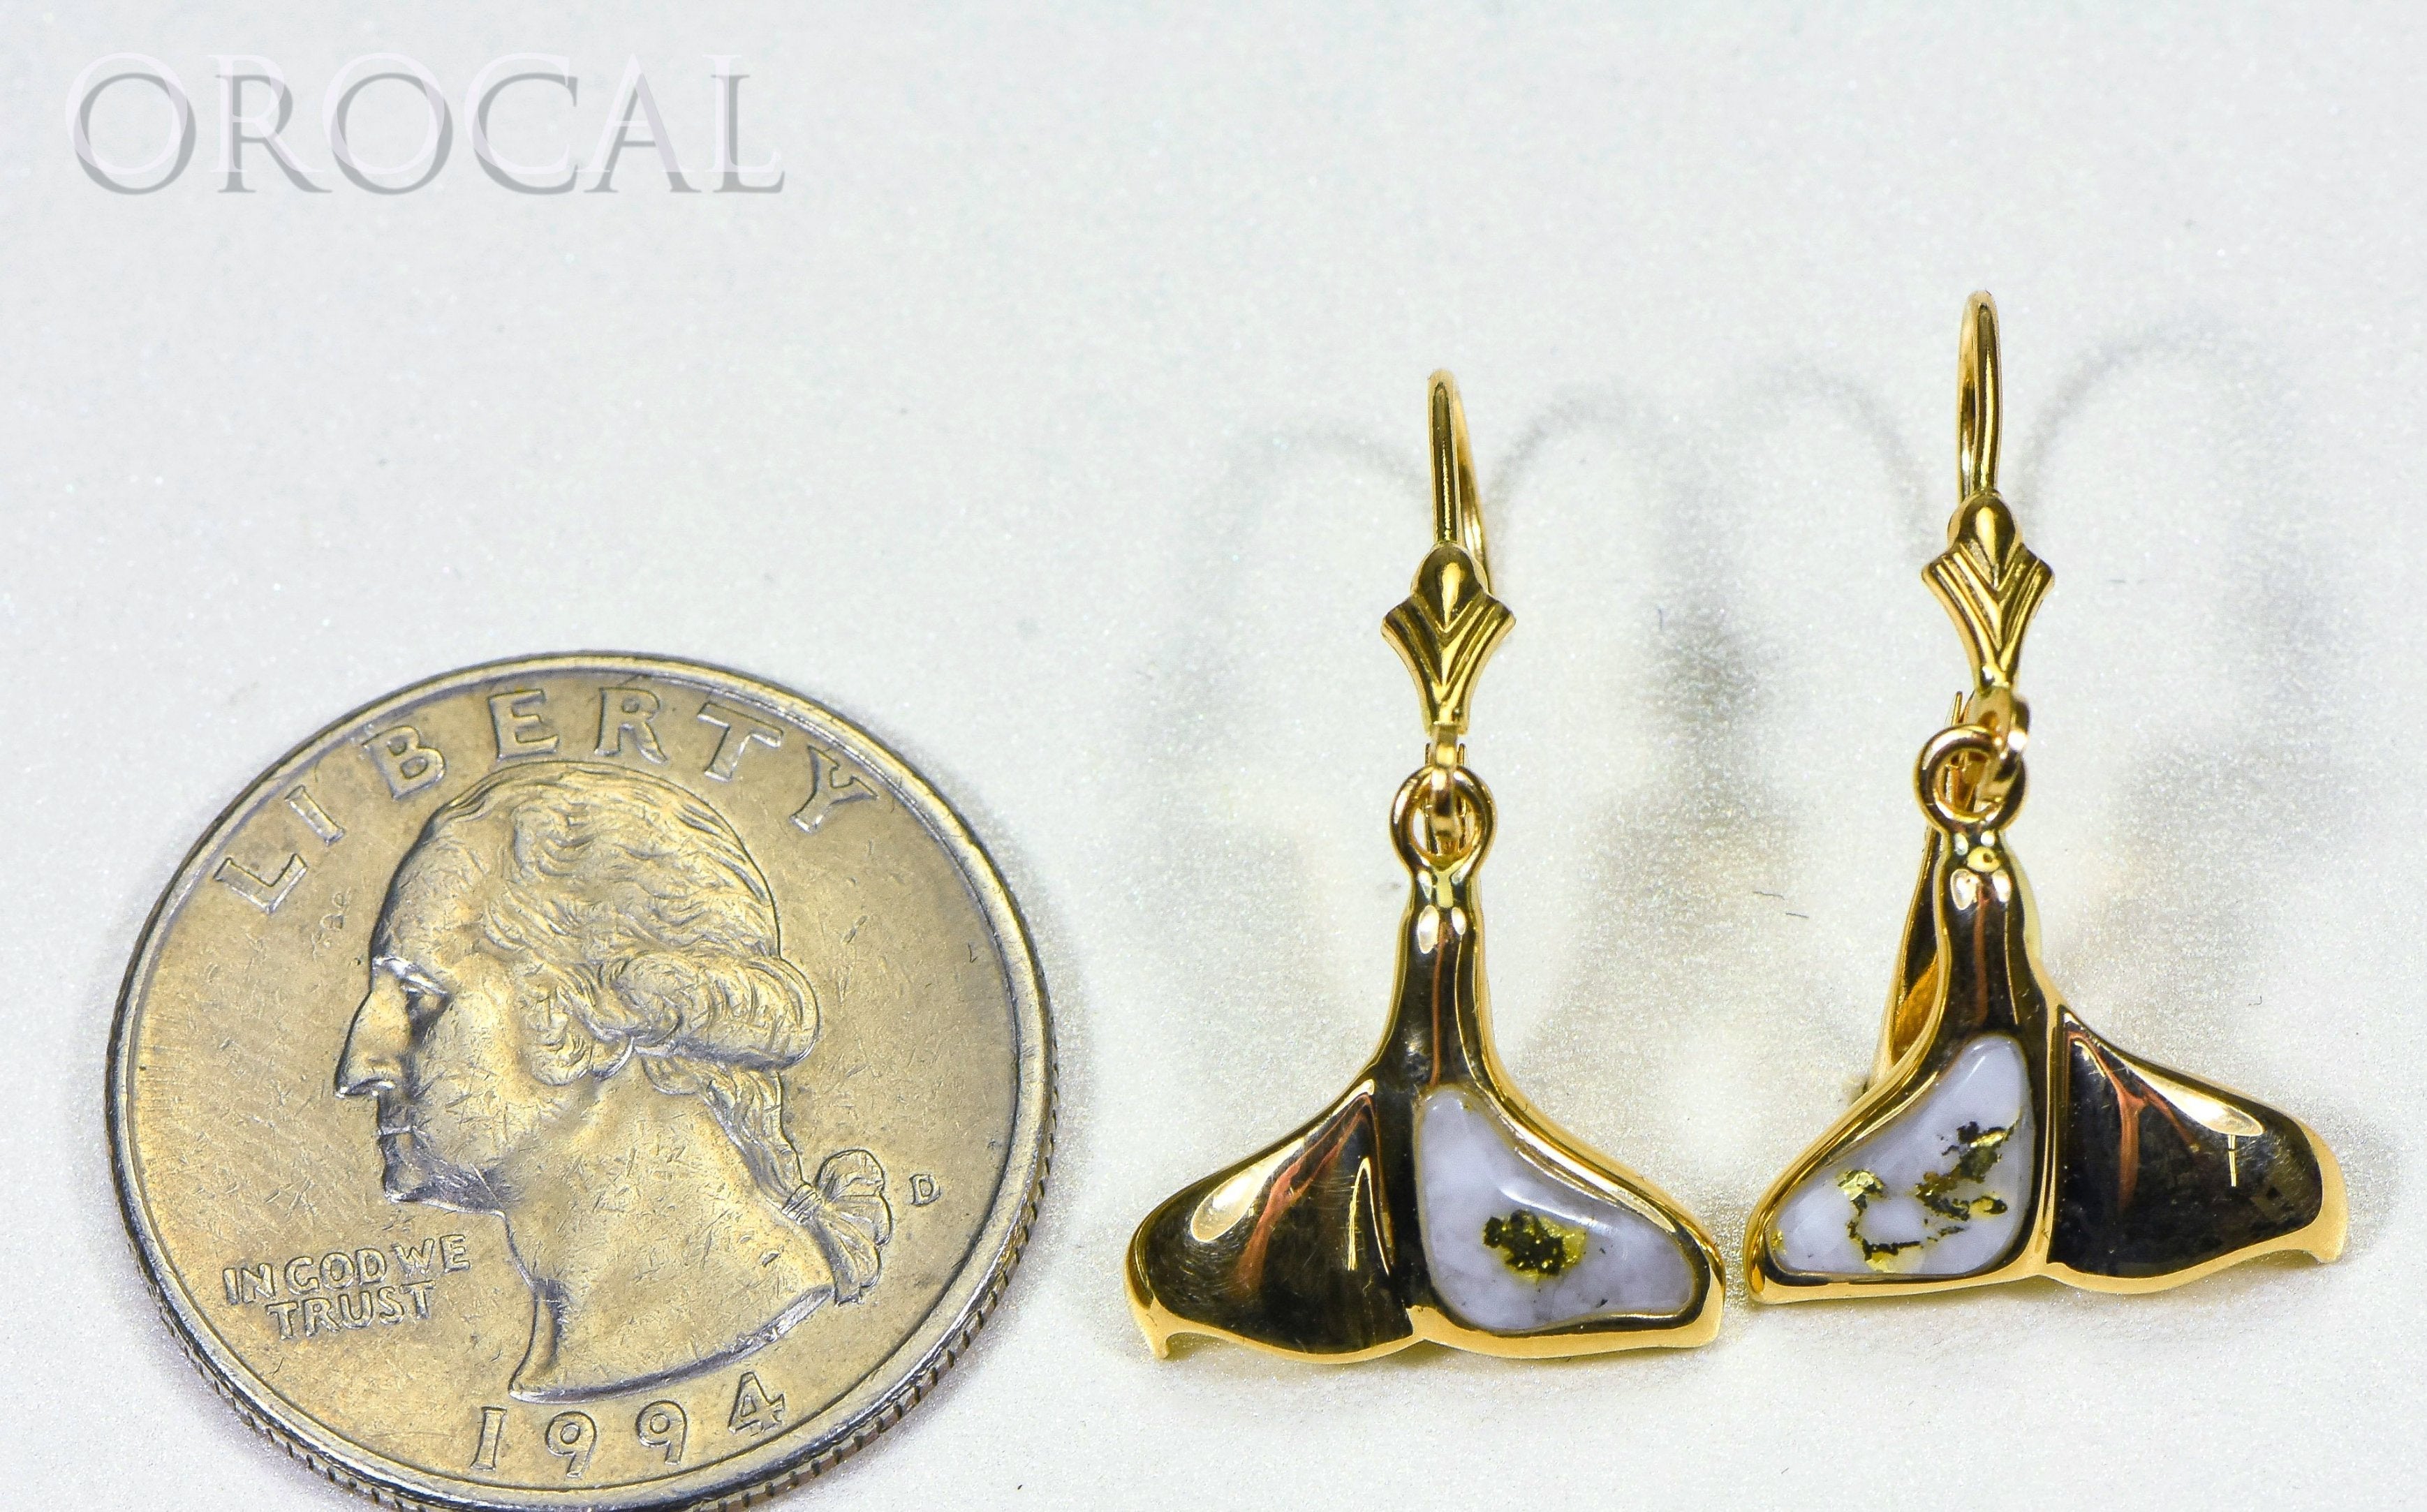 Gold Quartz Earrings "Orocal" EDLWT12Q/LB Genuine Hand Crafted Jewelry - 14K Gold Casting